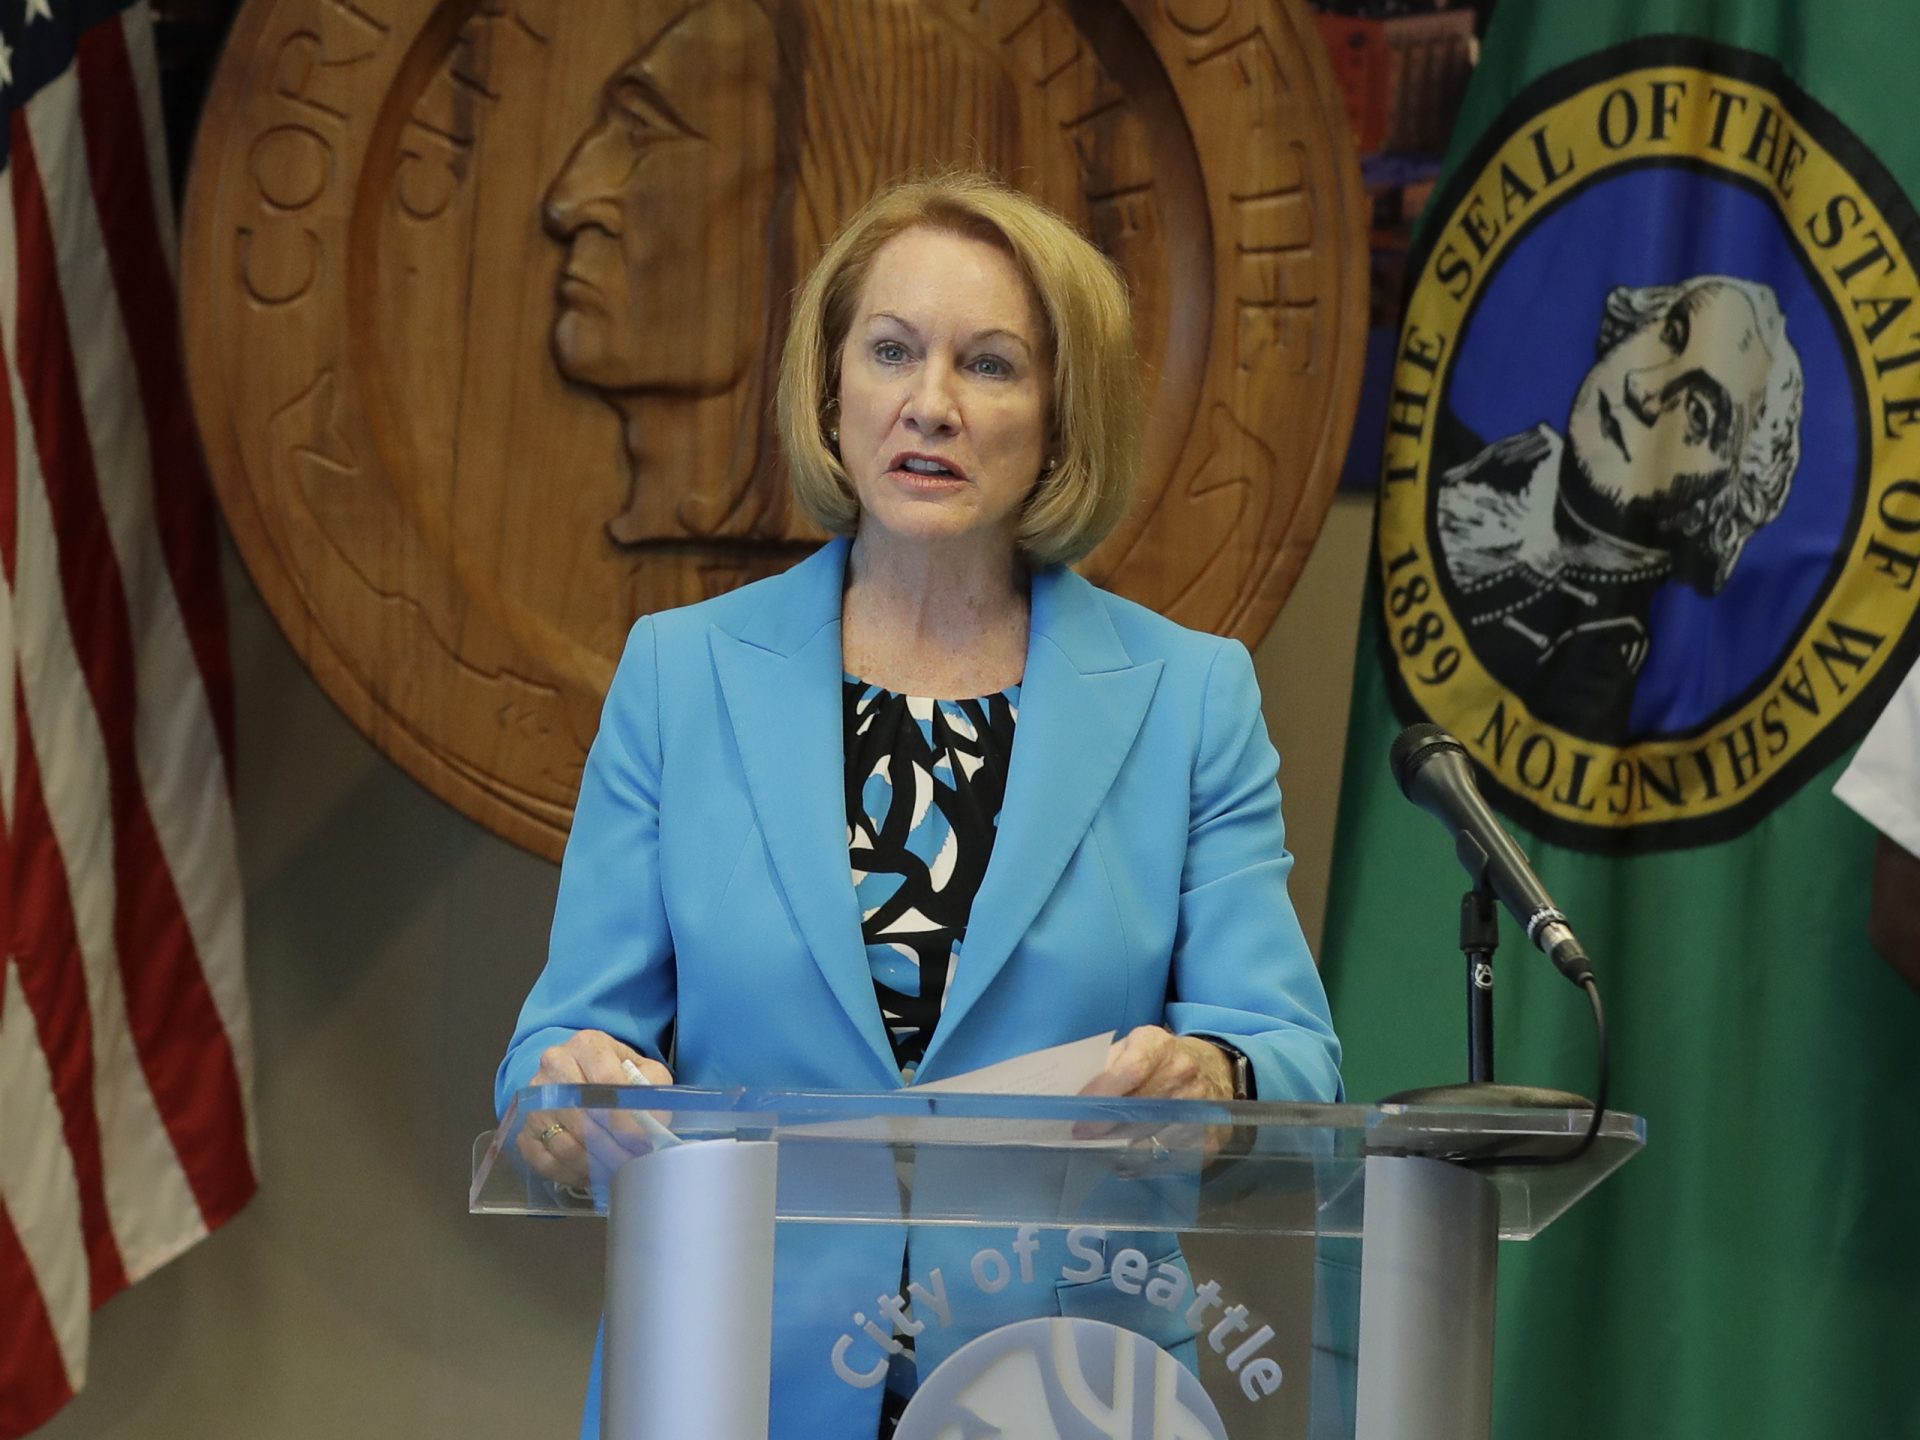 Seattle Mayor Jenny Durkan speaks earlier this month at a news conference. Durkan and the governor of Washington state said U.S. officers sent to protect federal buildings in the city have since left.